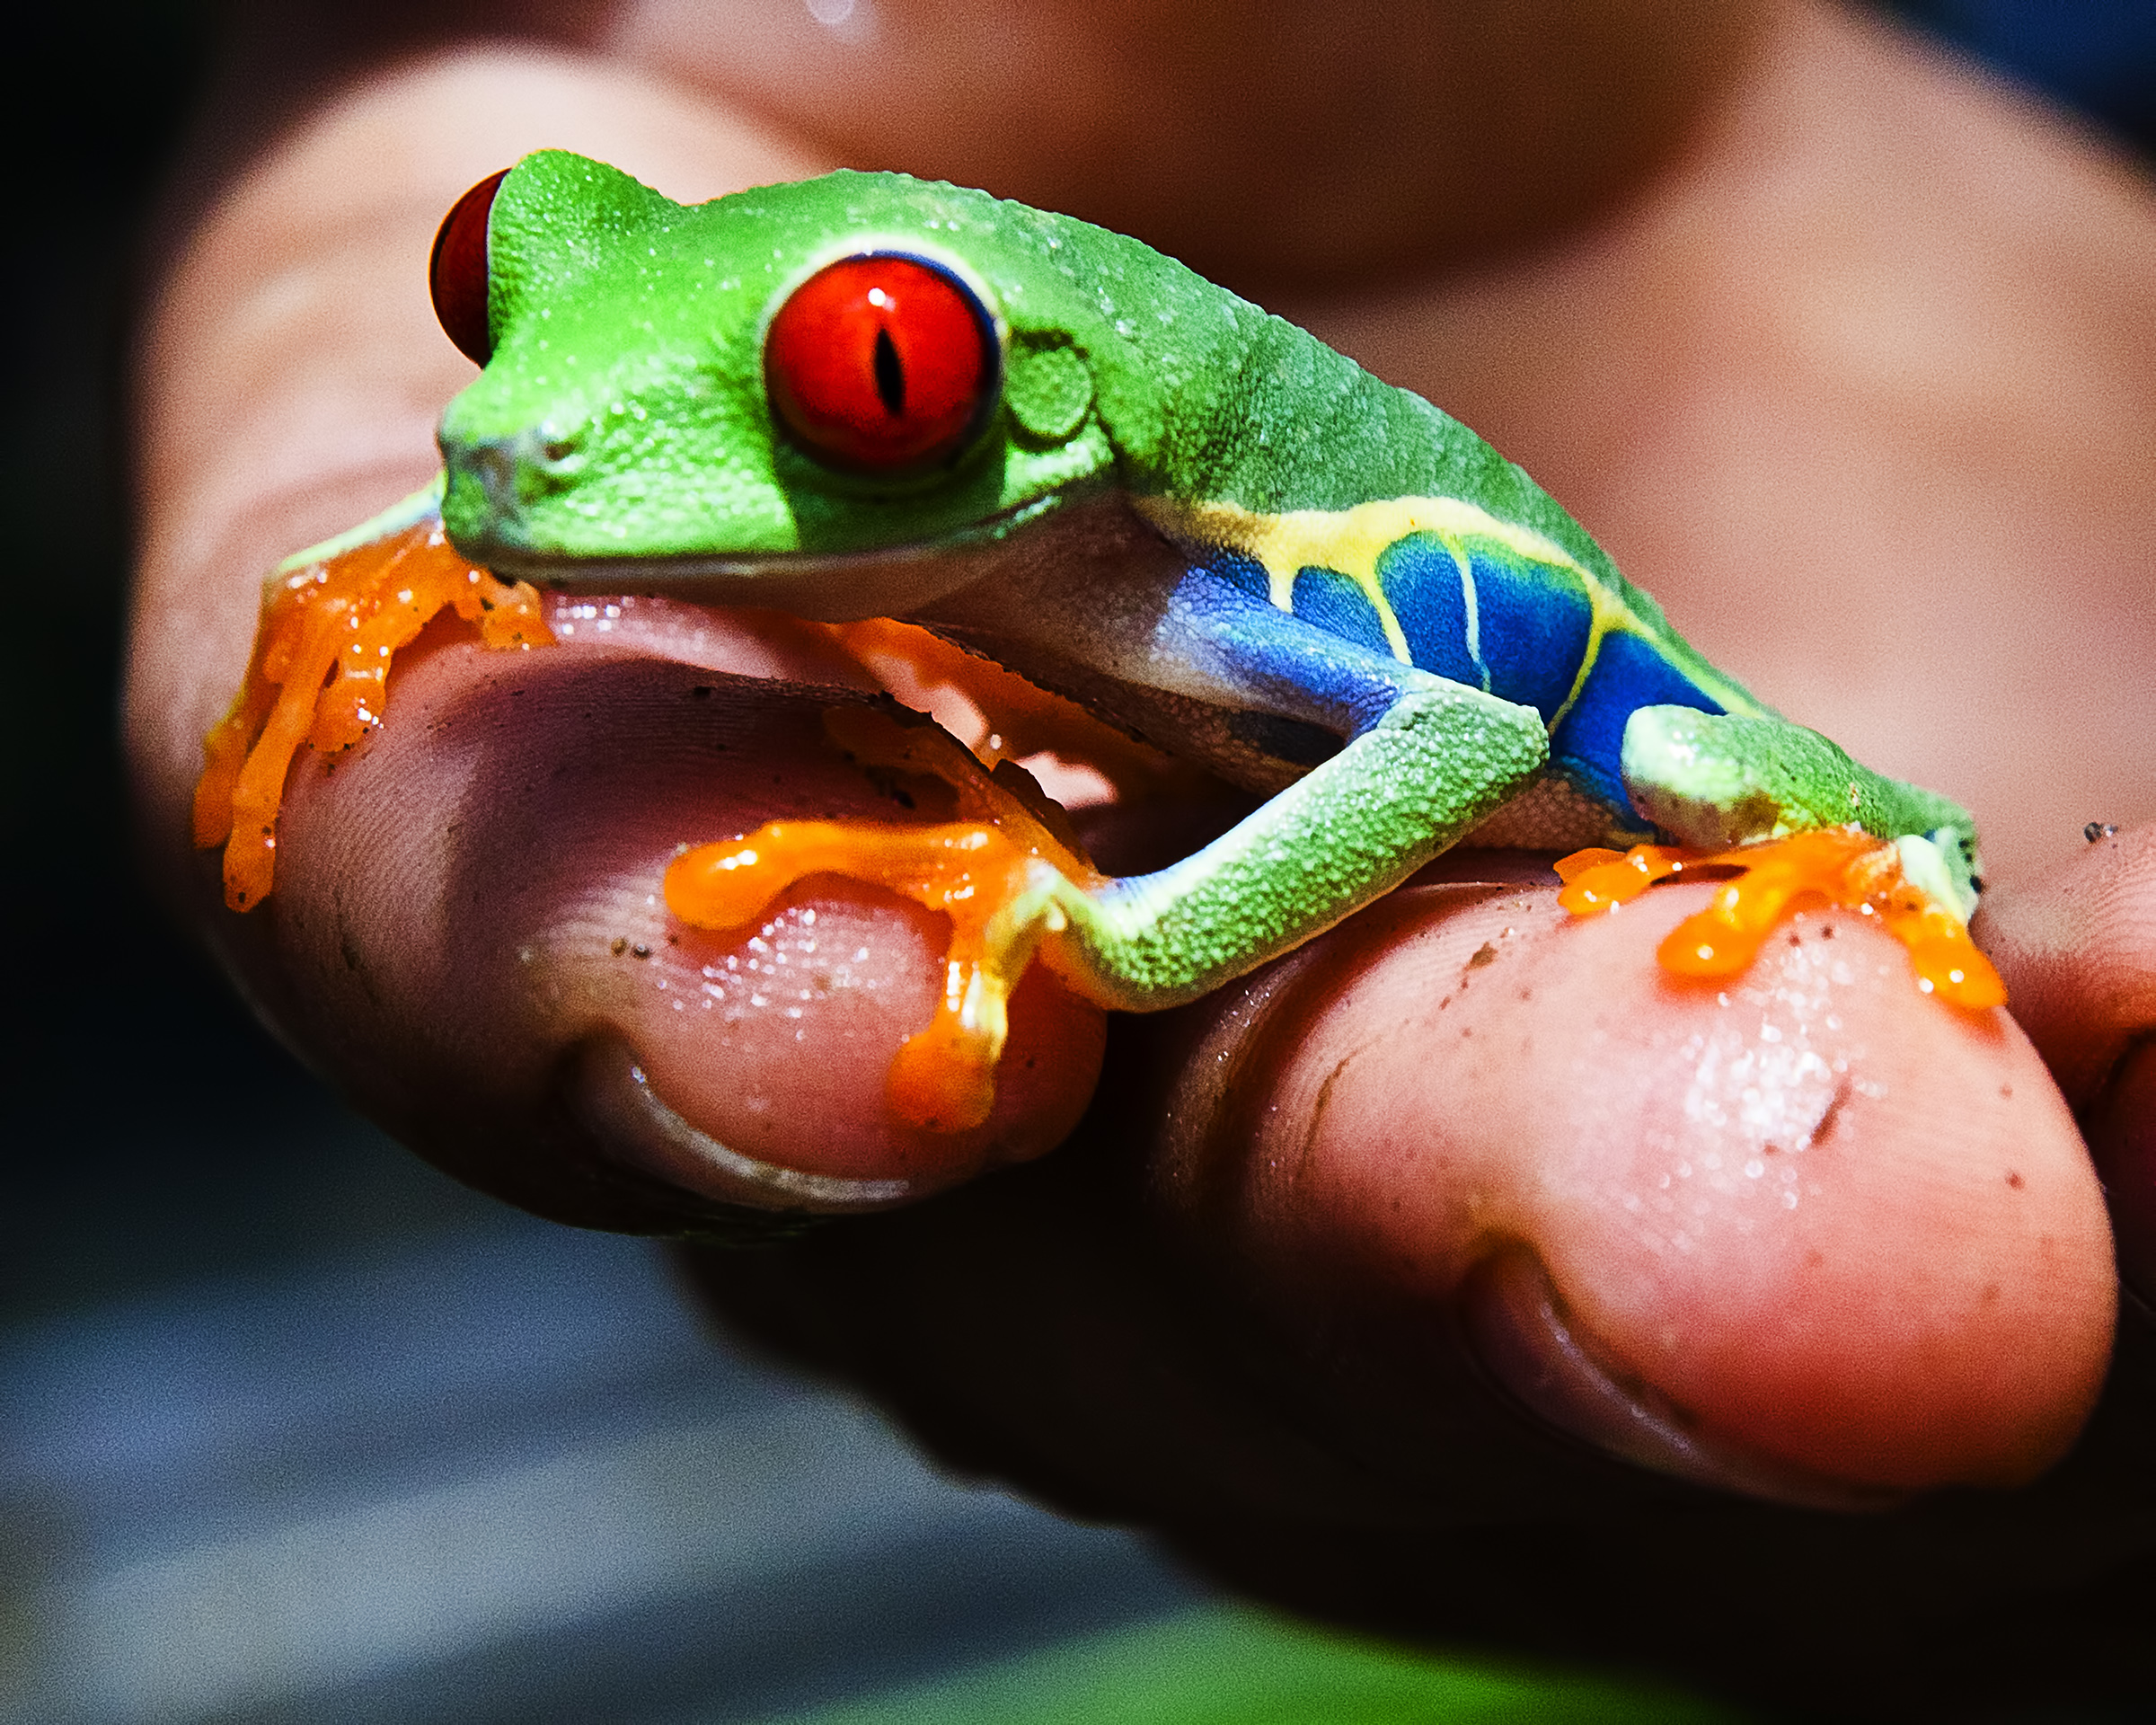 Frog, Amphibian, Rica, Lovely, Natural, HQ Photo